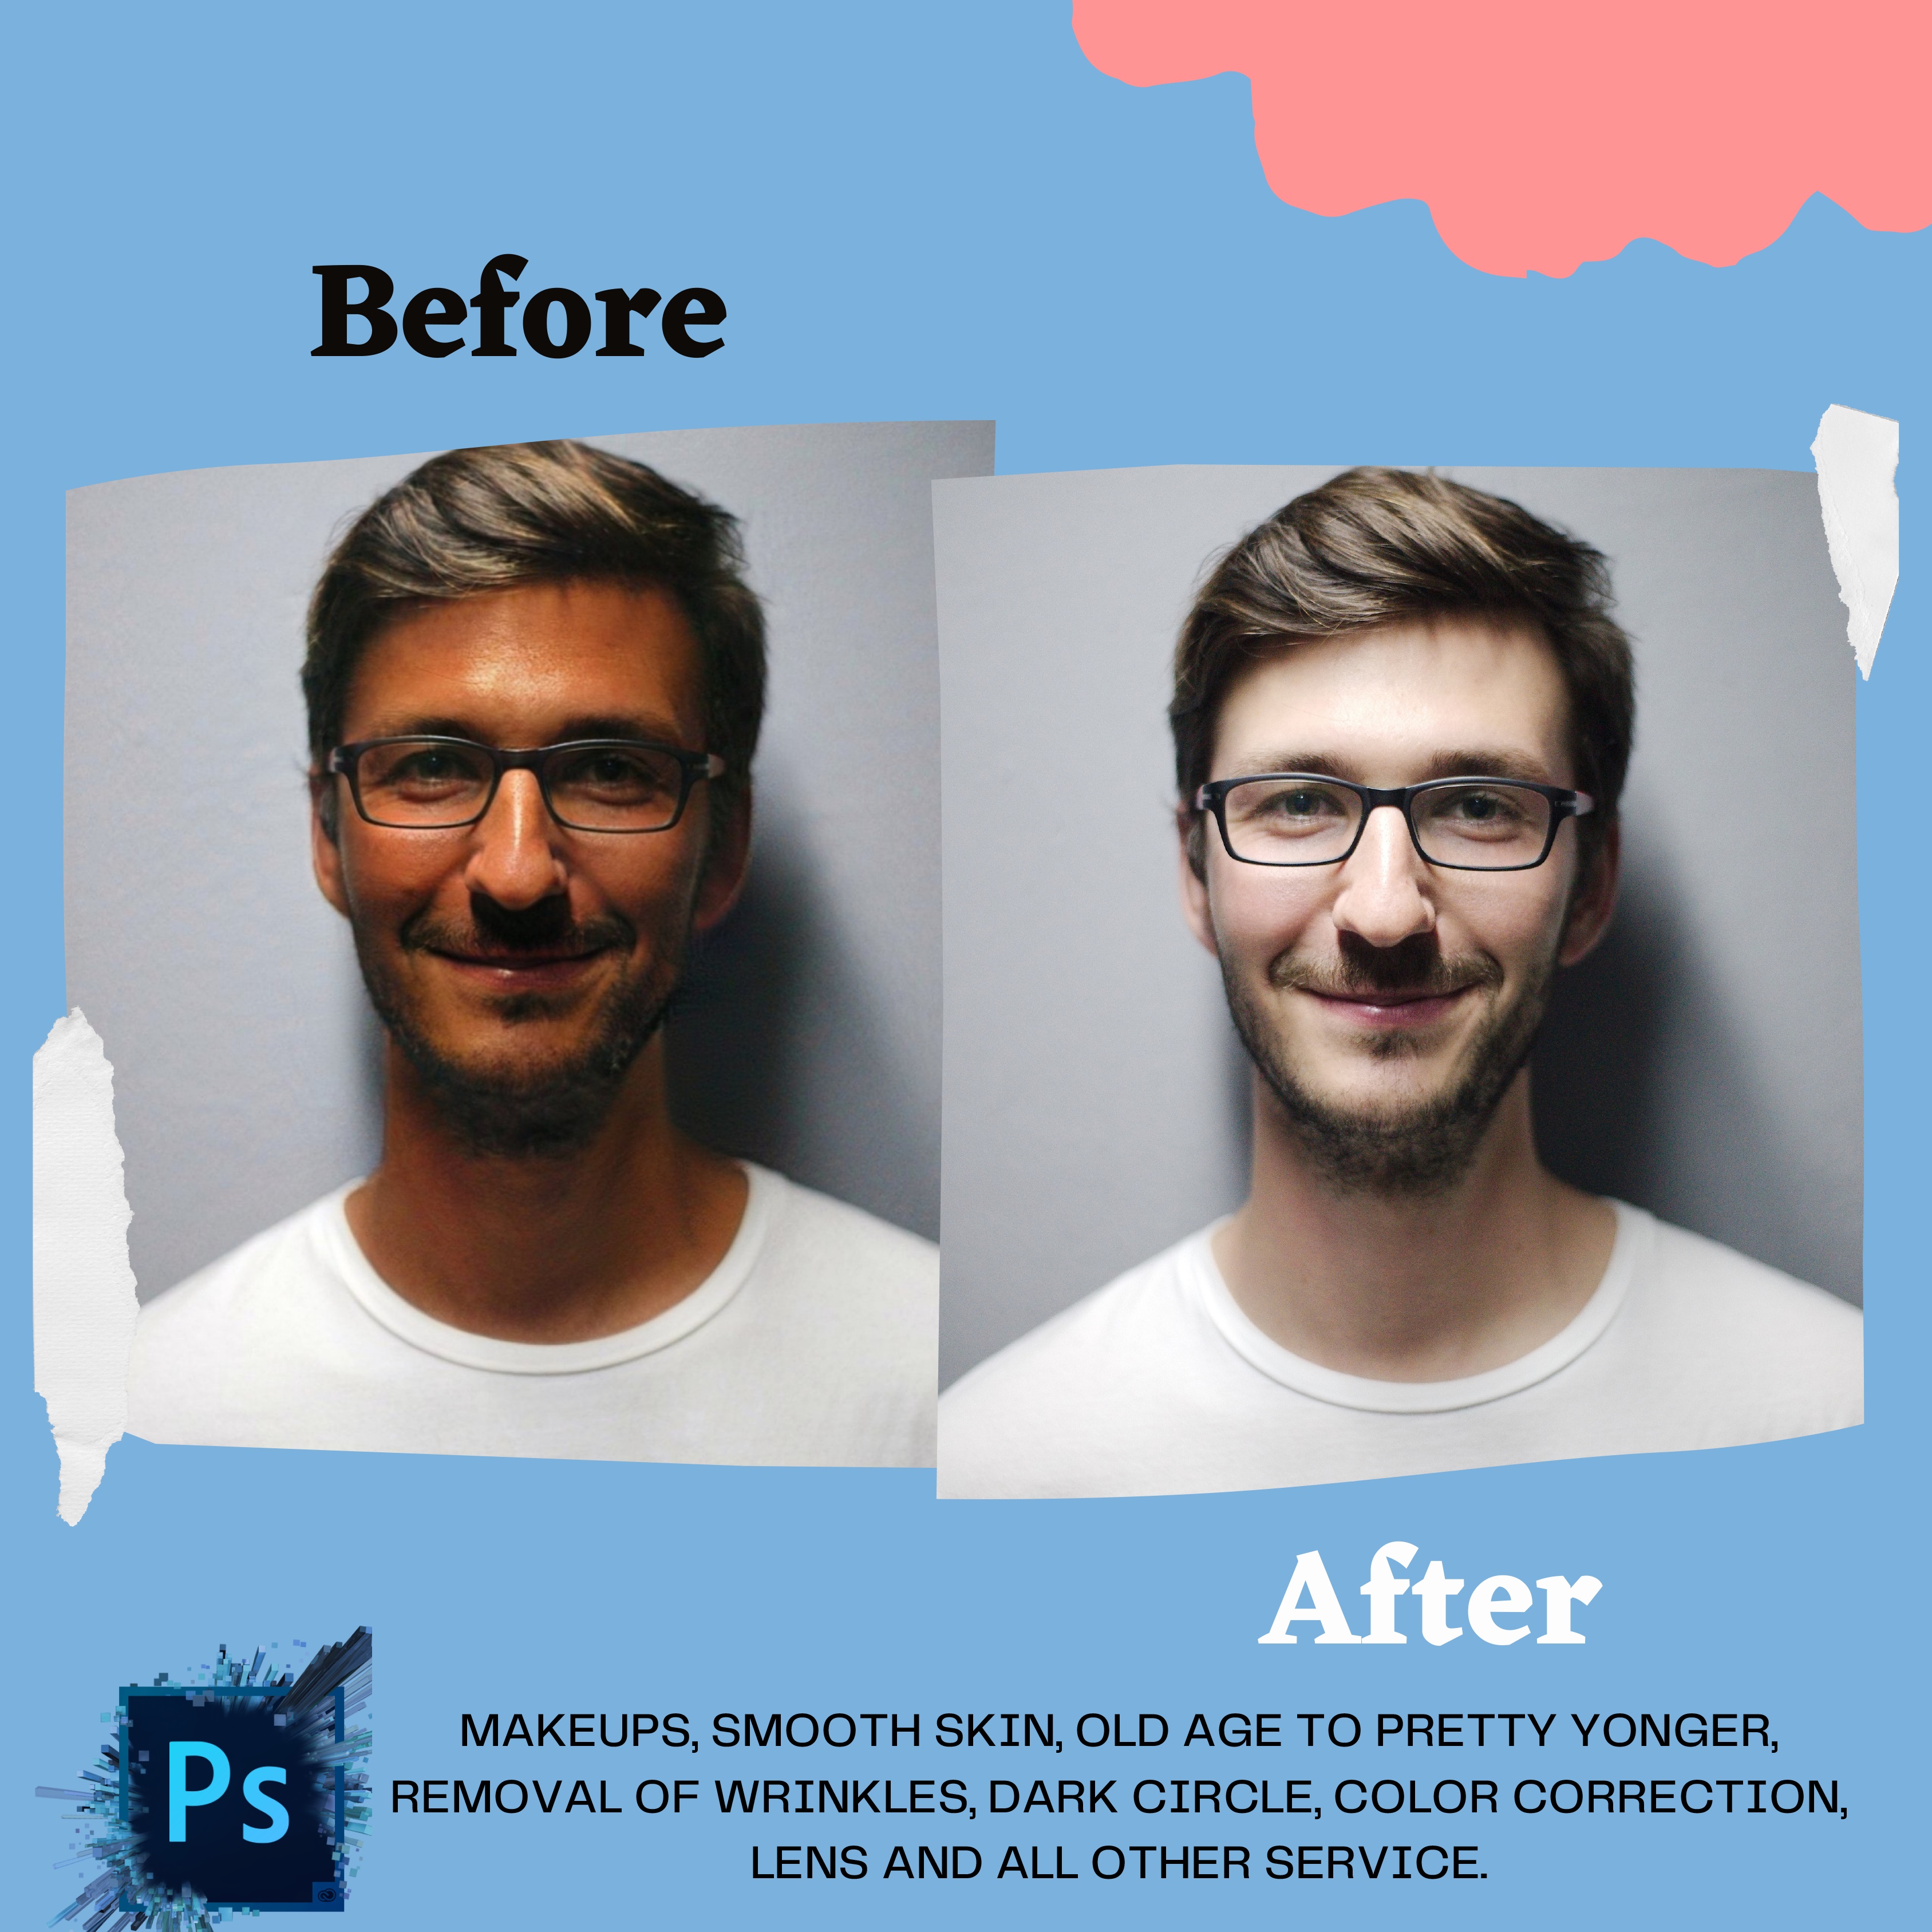 I will do any professional photoshop editing or photo background remove or manipulation